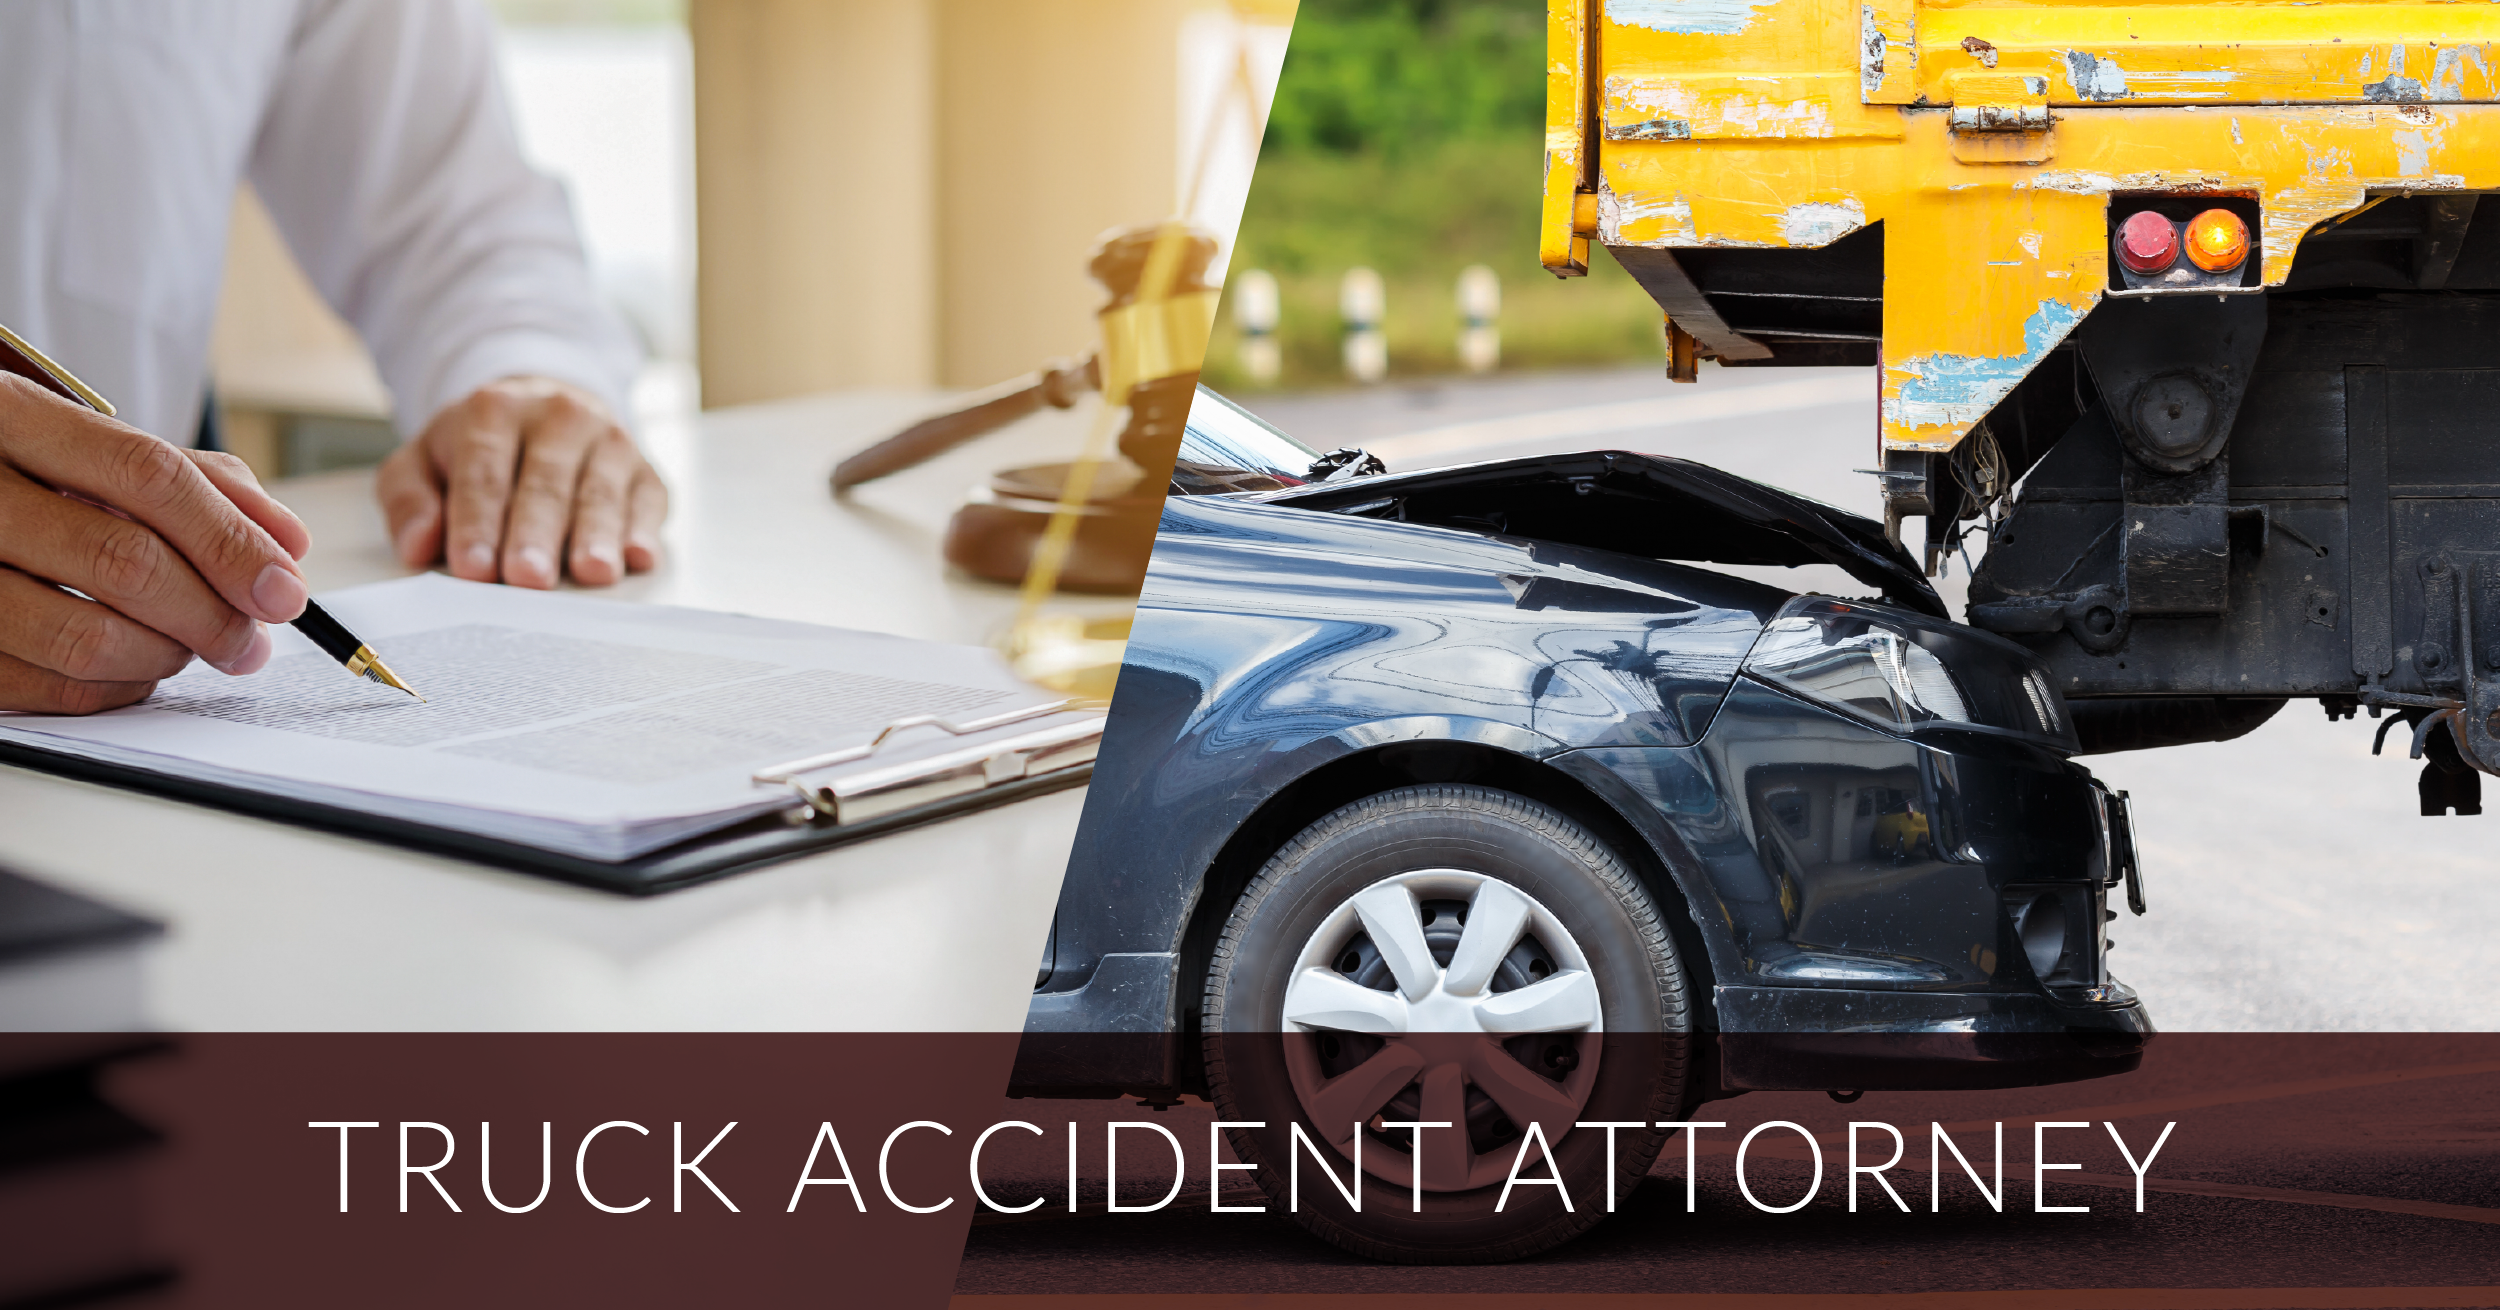 Truck Accident Lawyer in Los Angeles - Call MKP Law Group, LLP